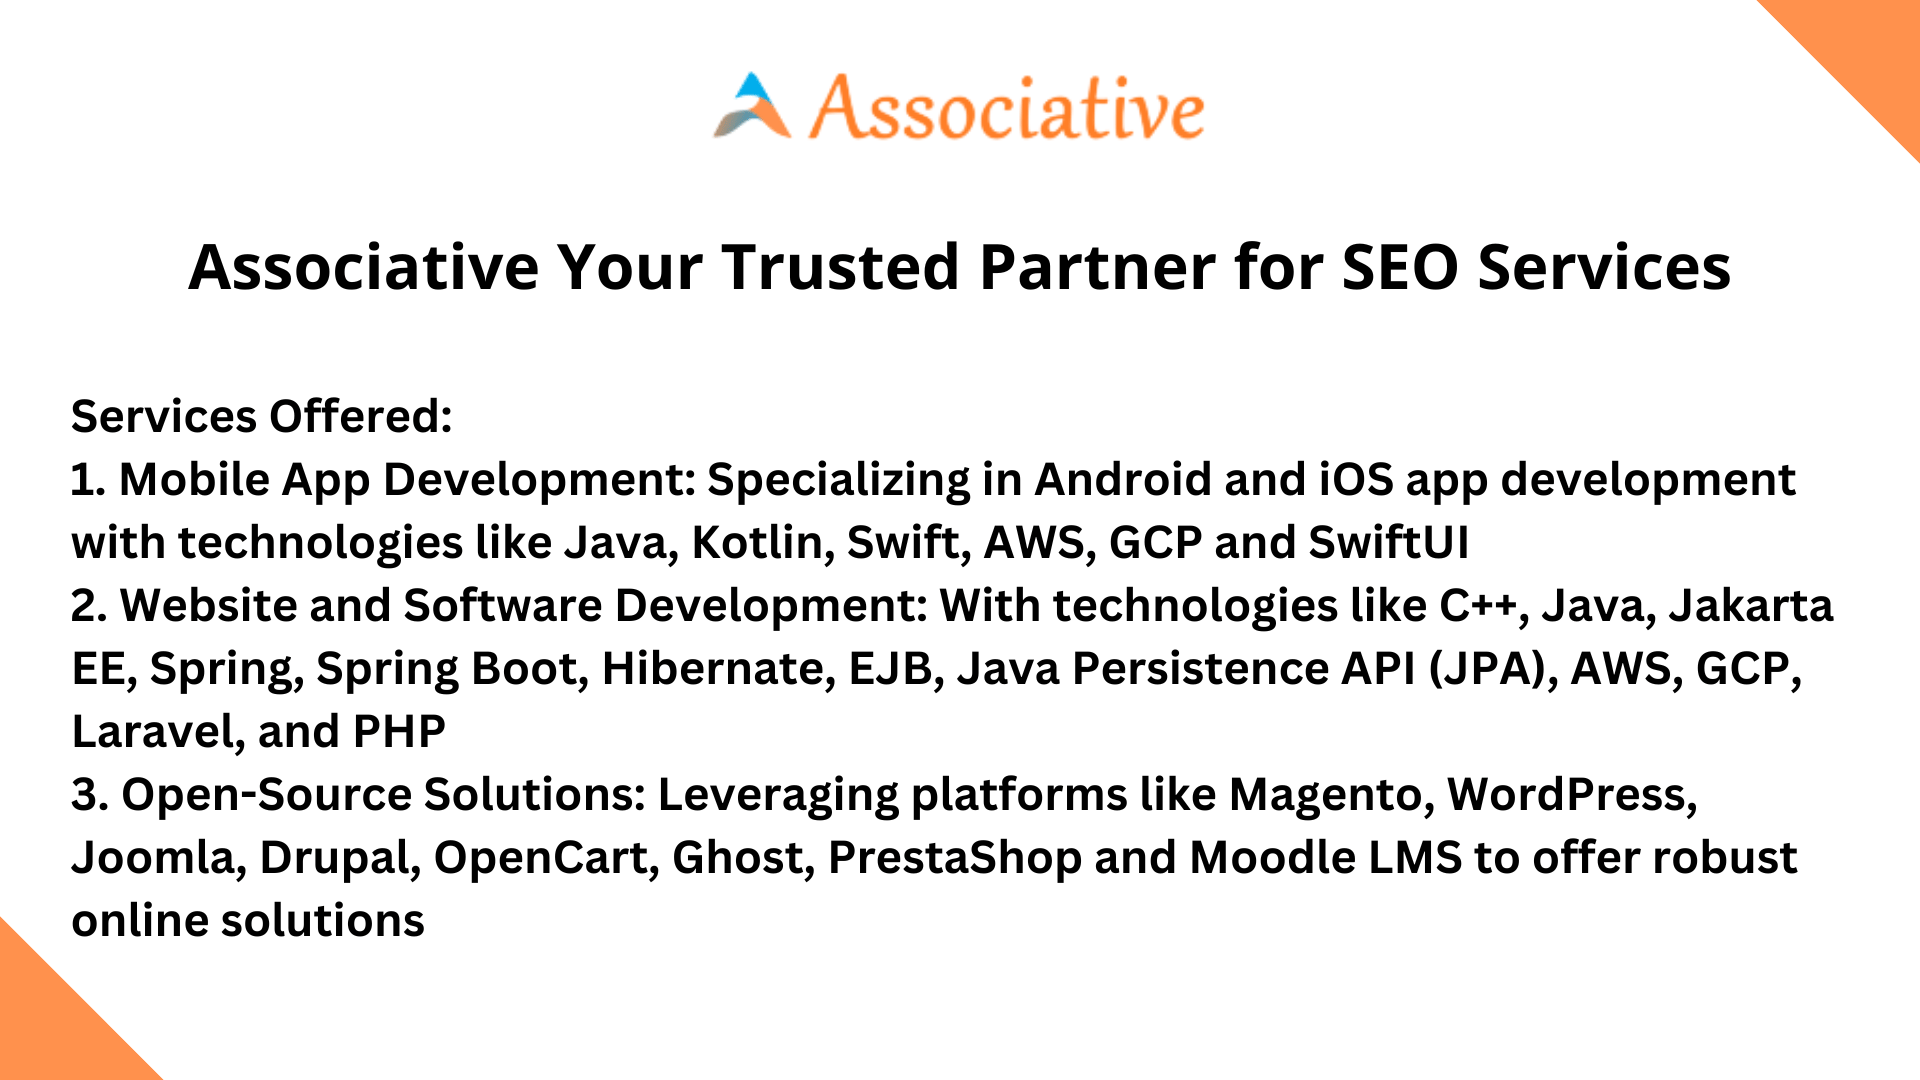 Associative Your Trusted Partner for SEO Services